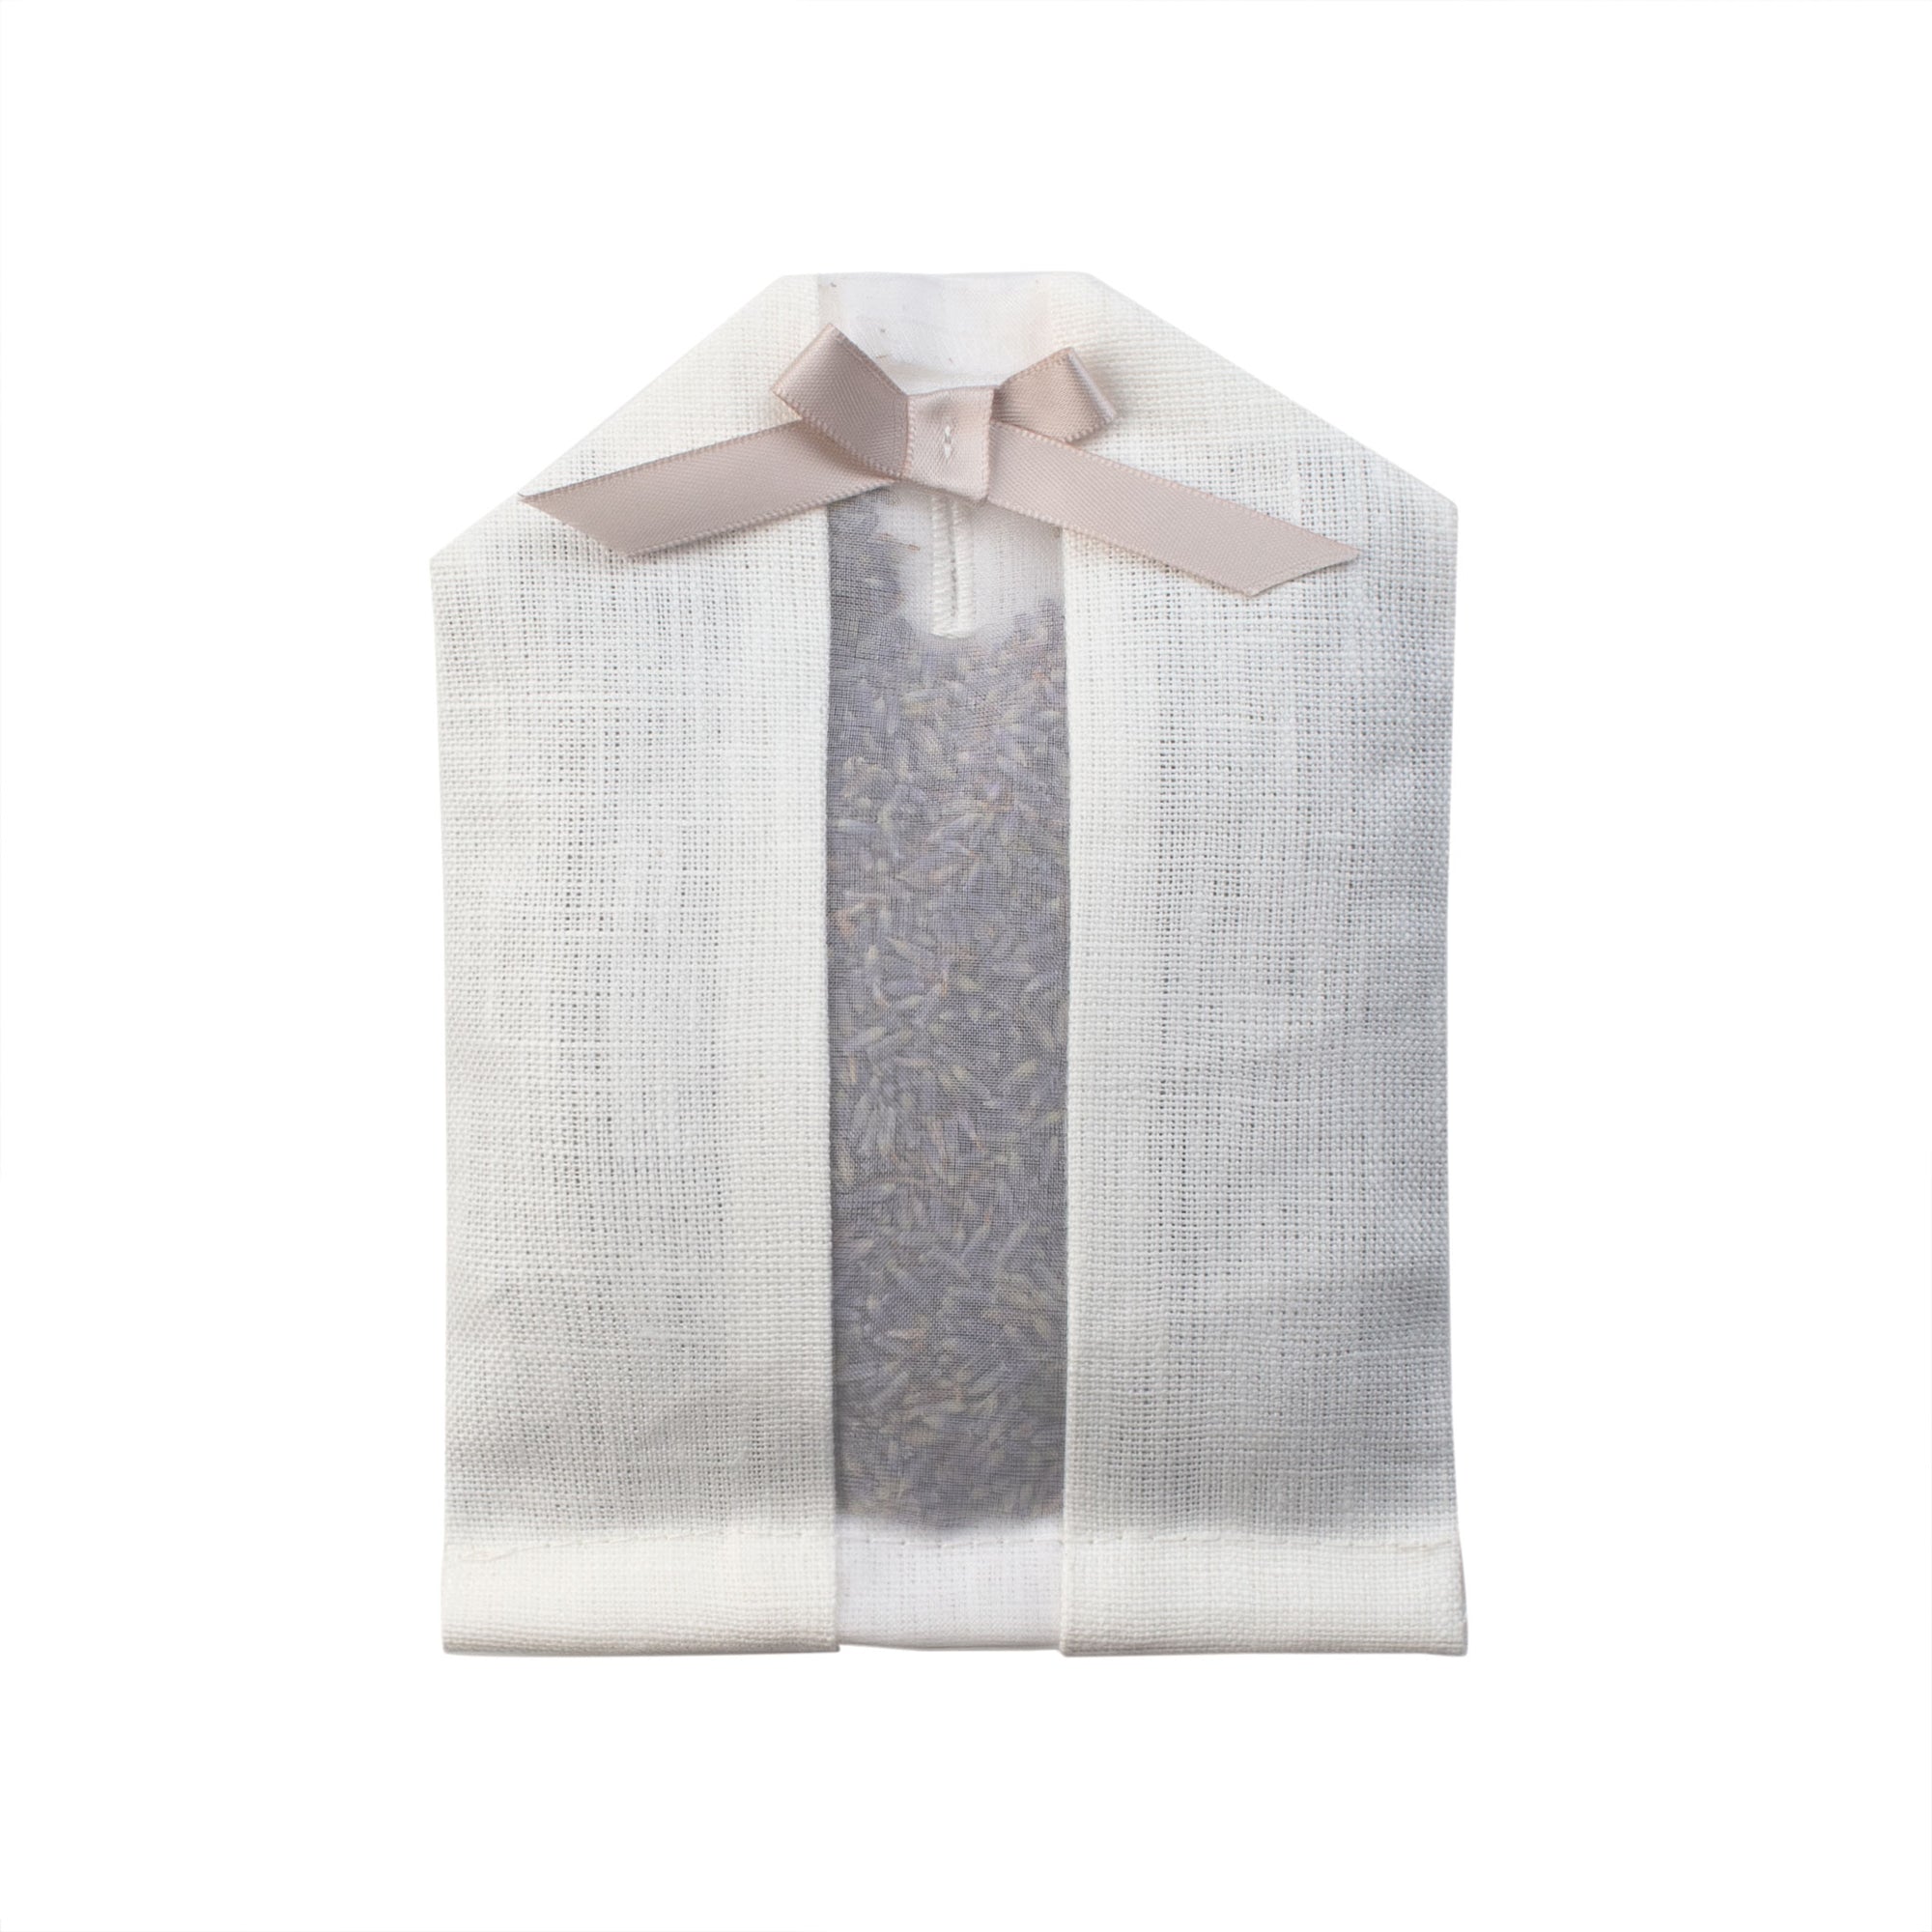 Le Blanc Lily of the Valley Scented Hanger Sachet – Hampton Court Essential  Luxuries & The Lavender Shop